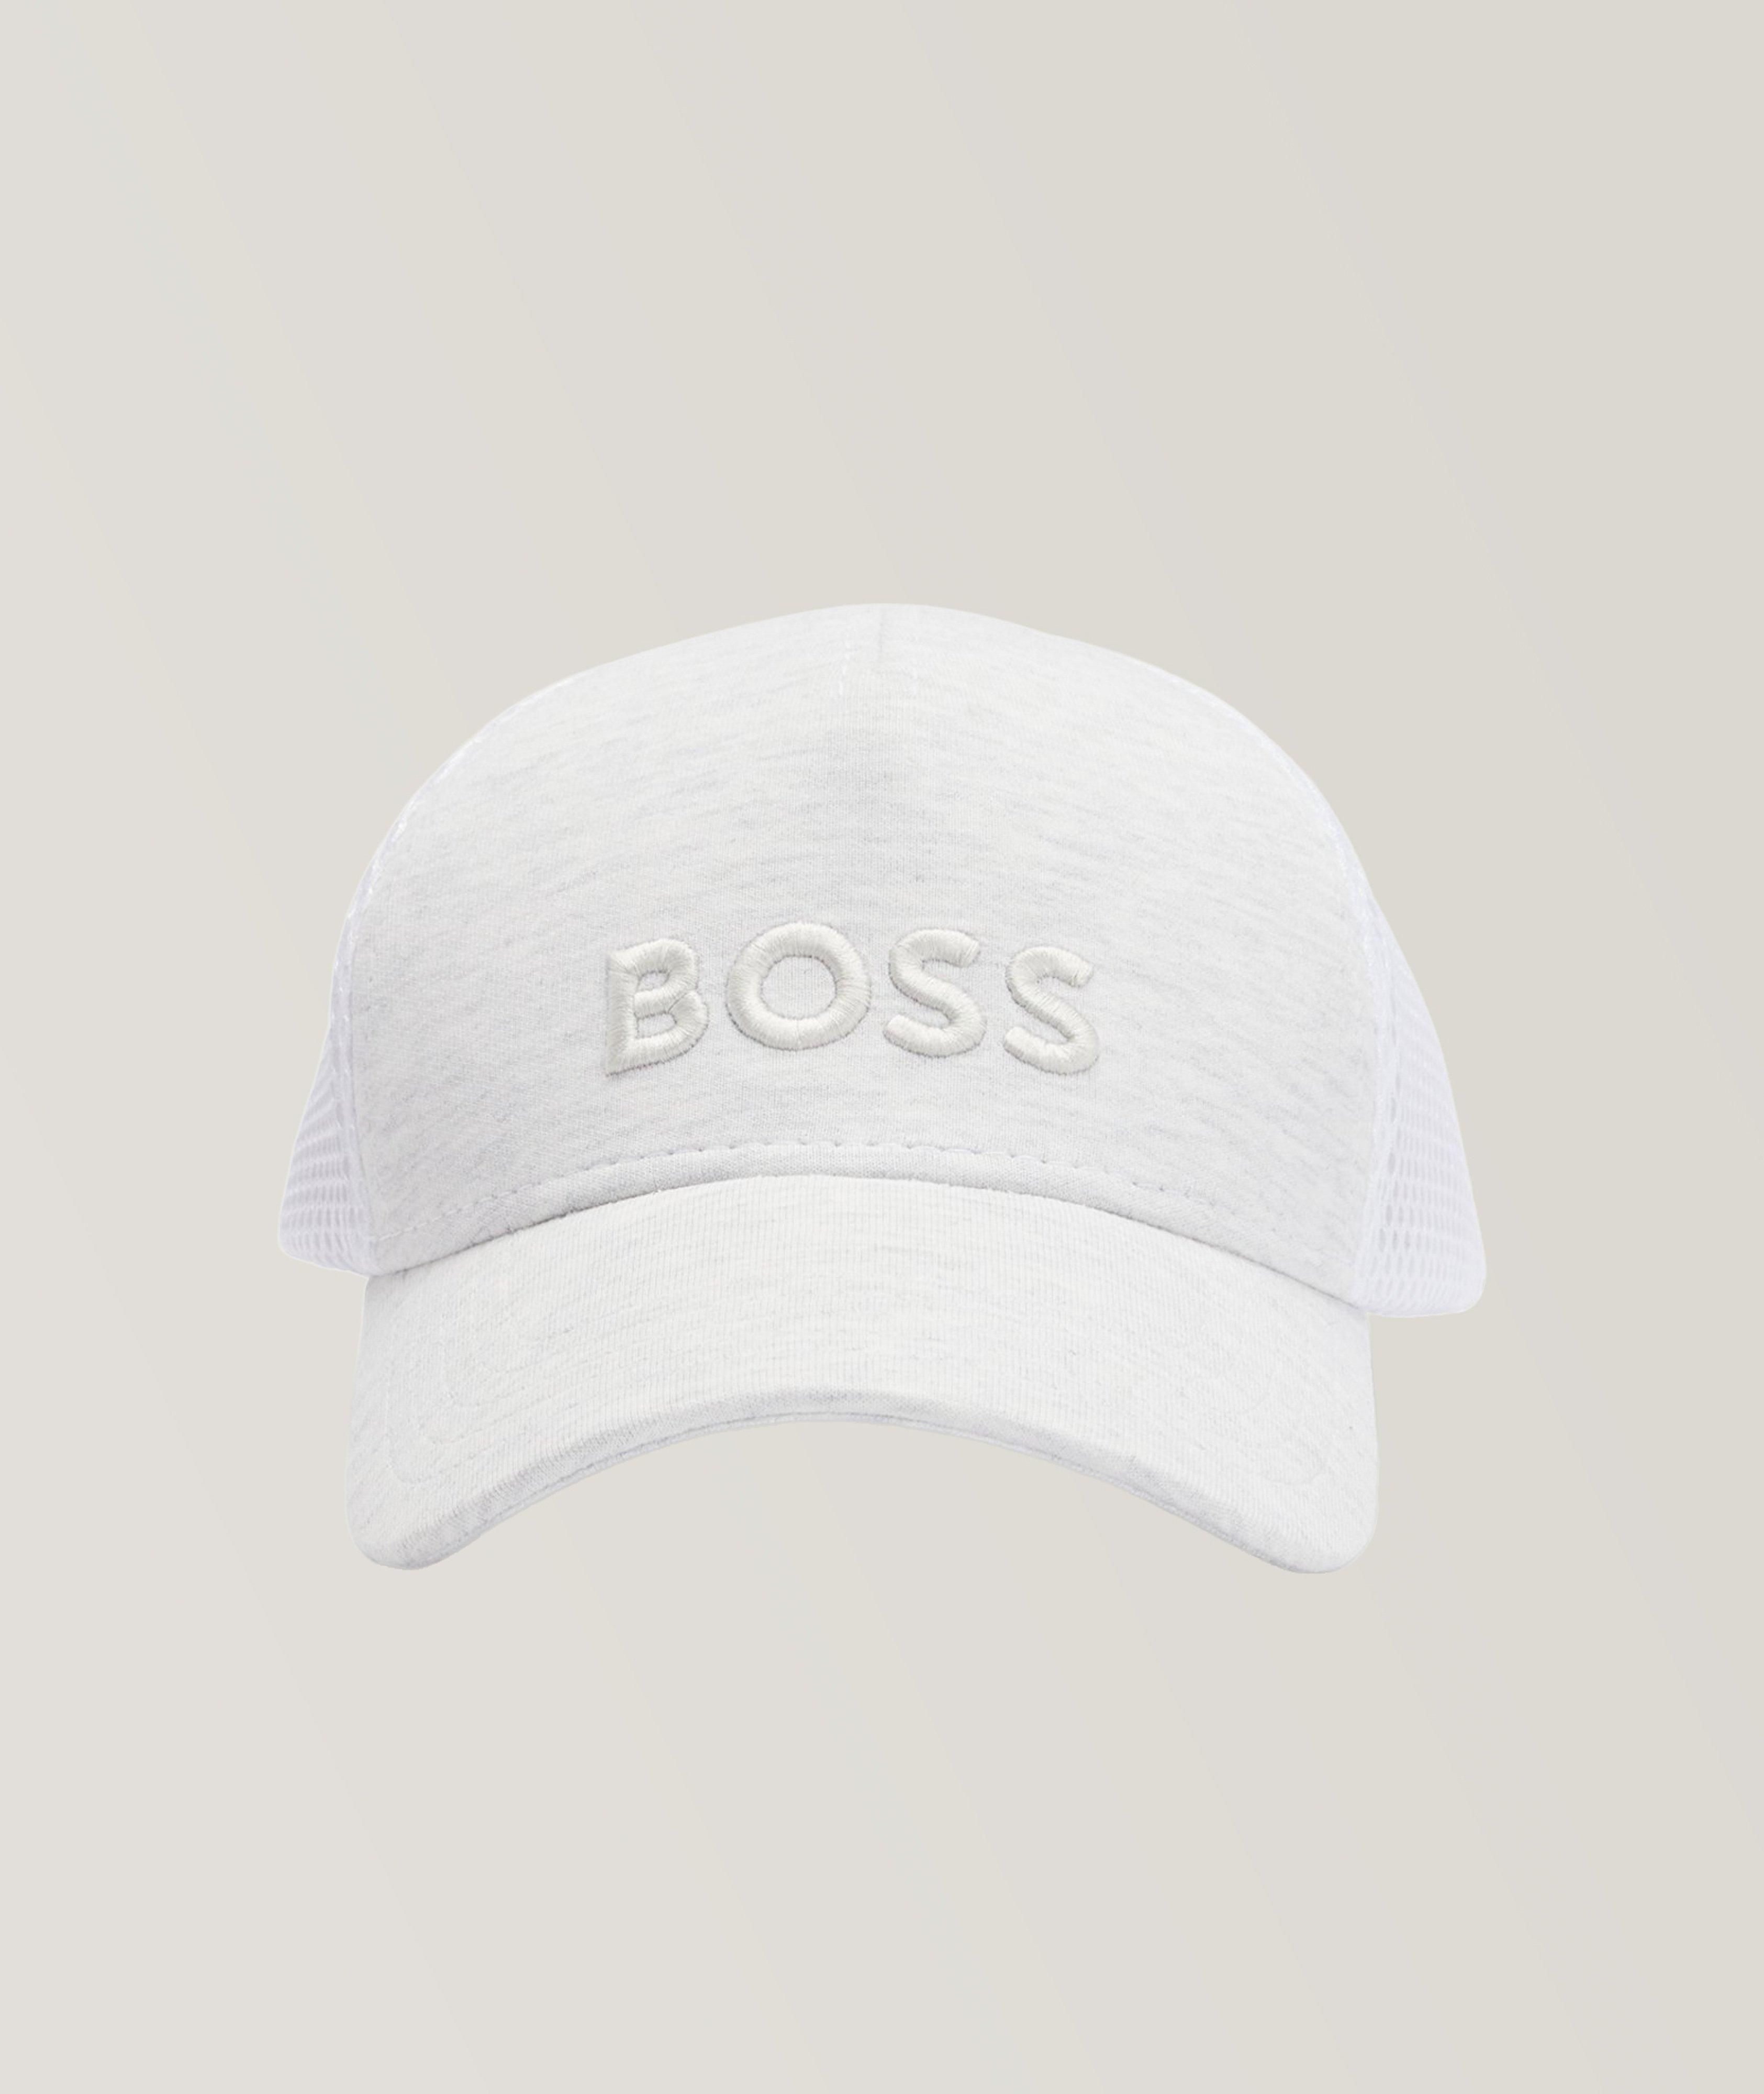 Logo Embroidered Mixed Material Cap image 0